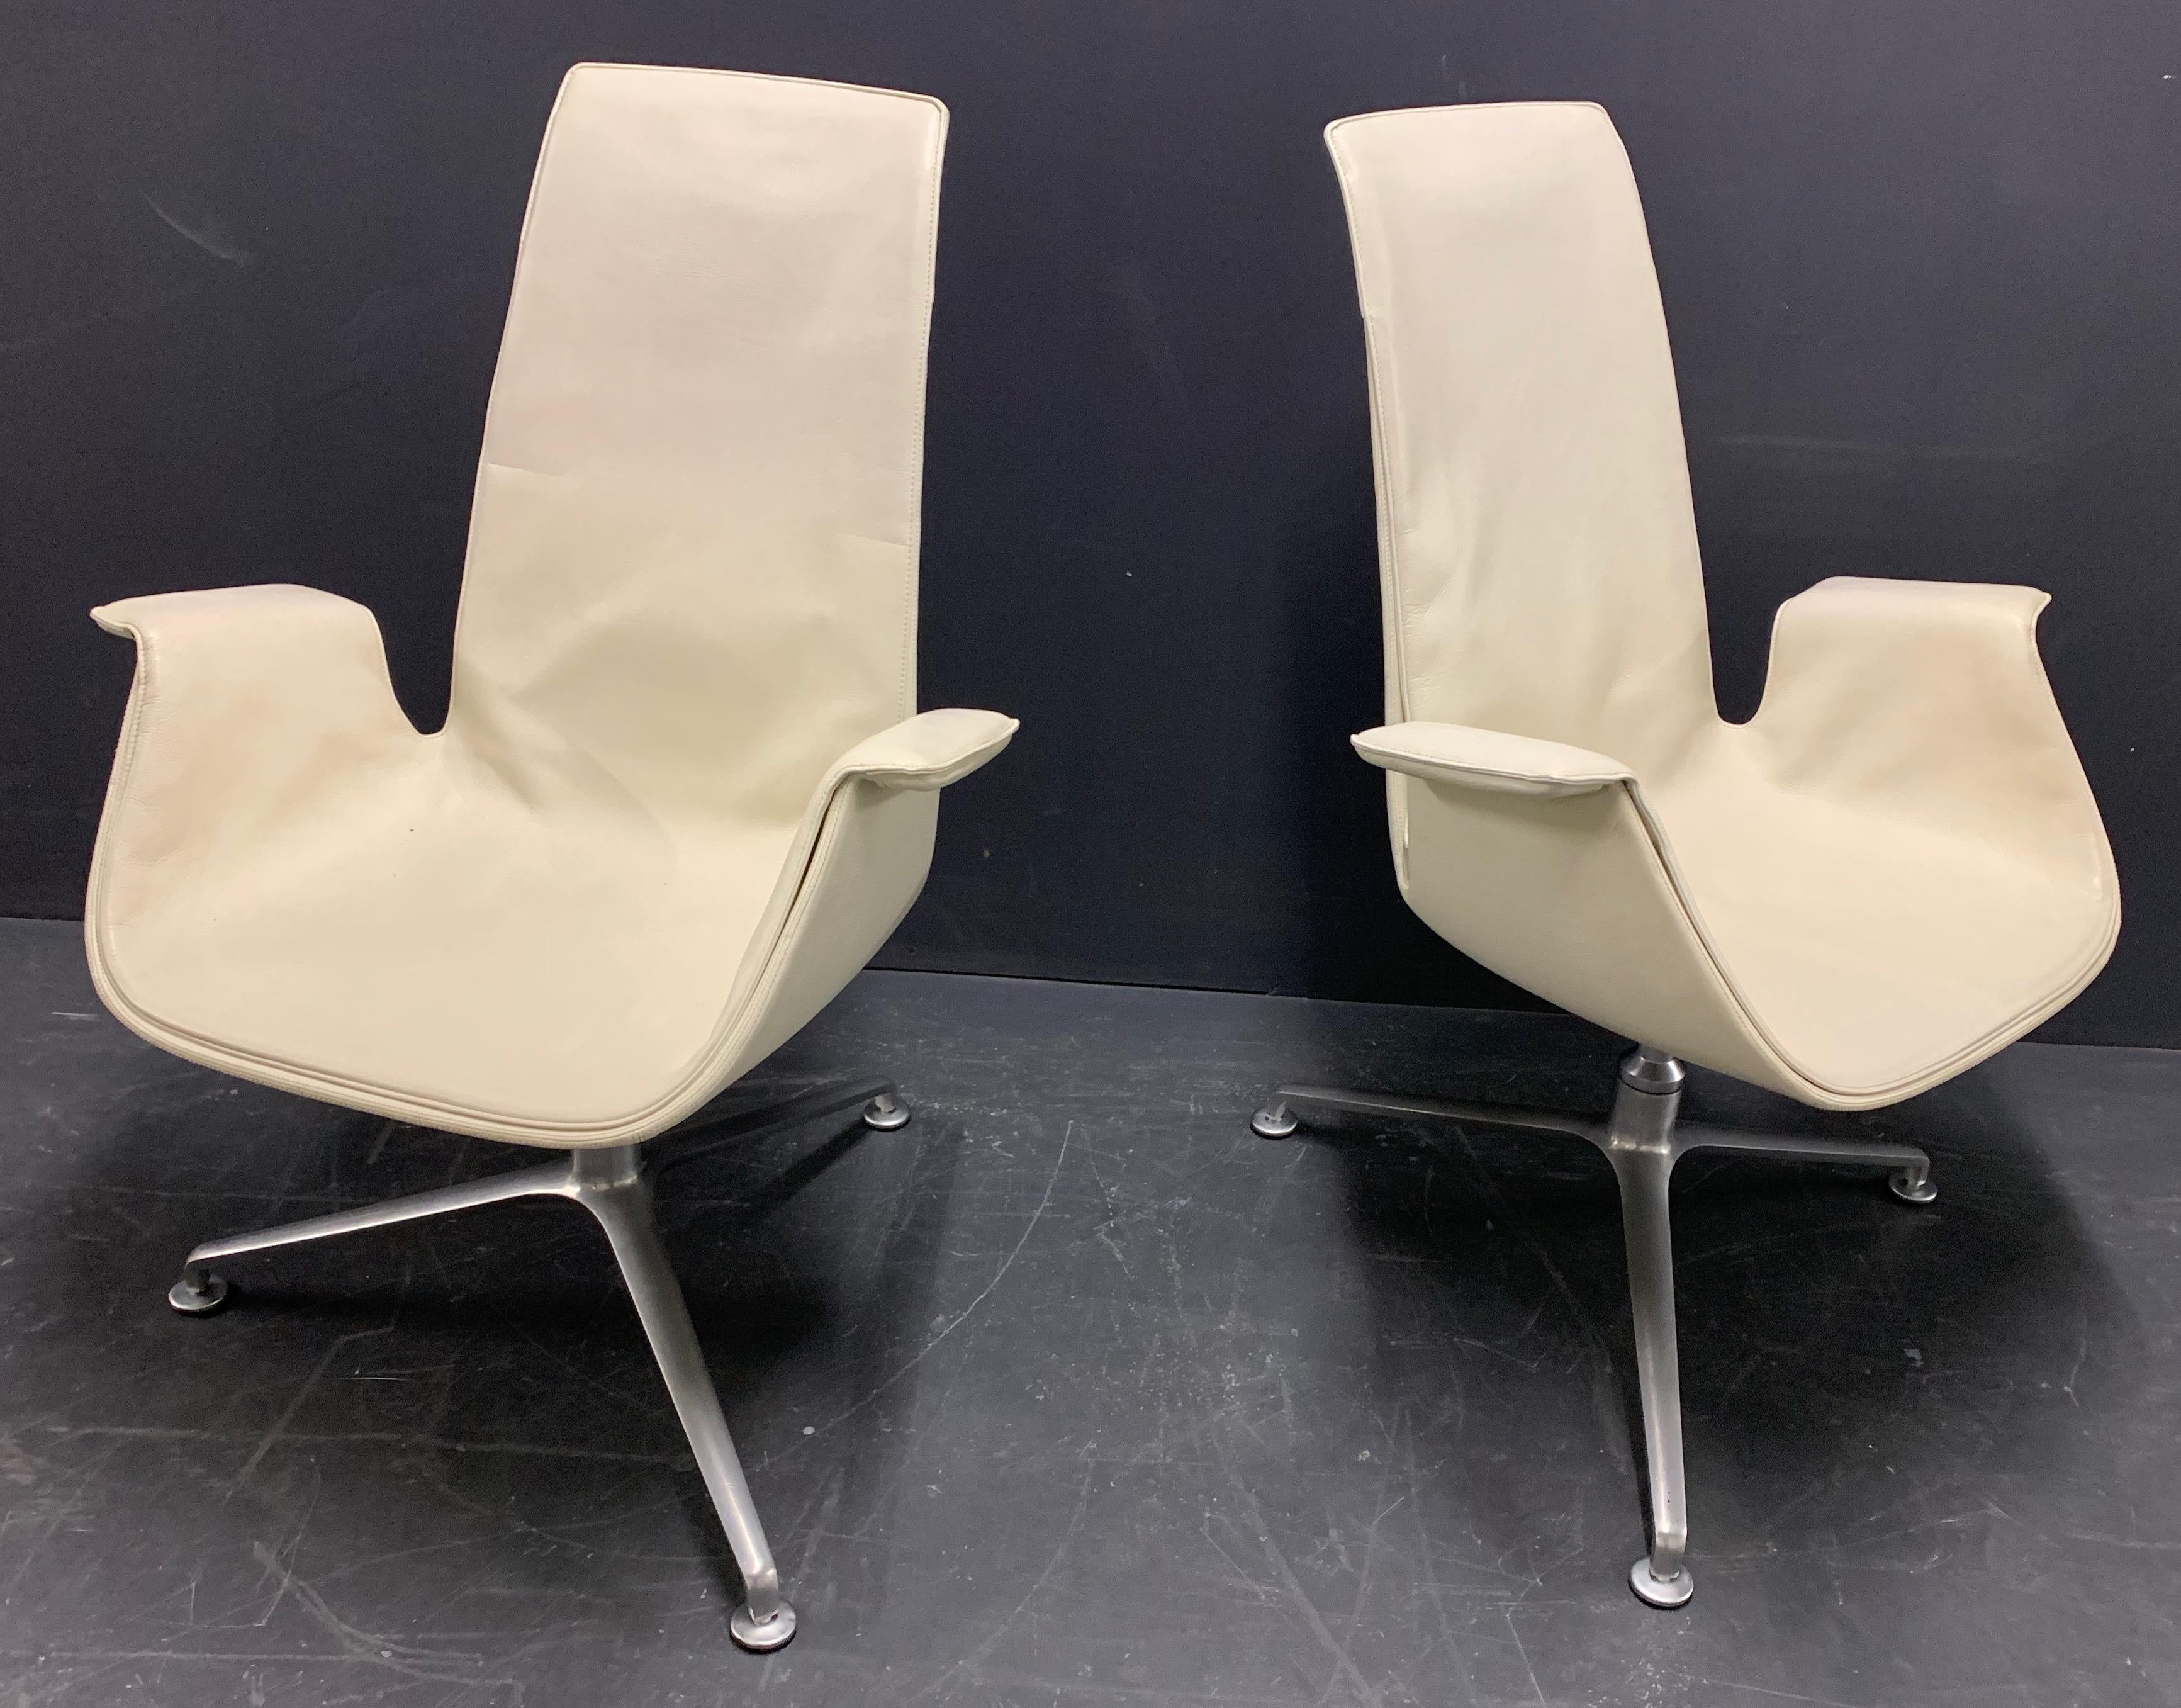 Showroom models in good condition. With swivel bases. These chairs have been designed 1968 and produced by Walter knoll.